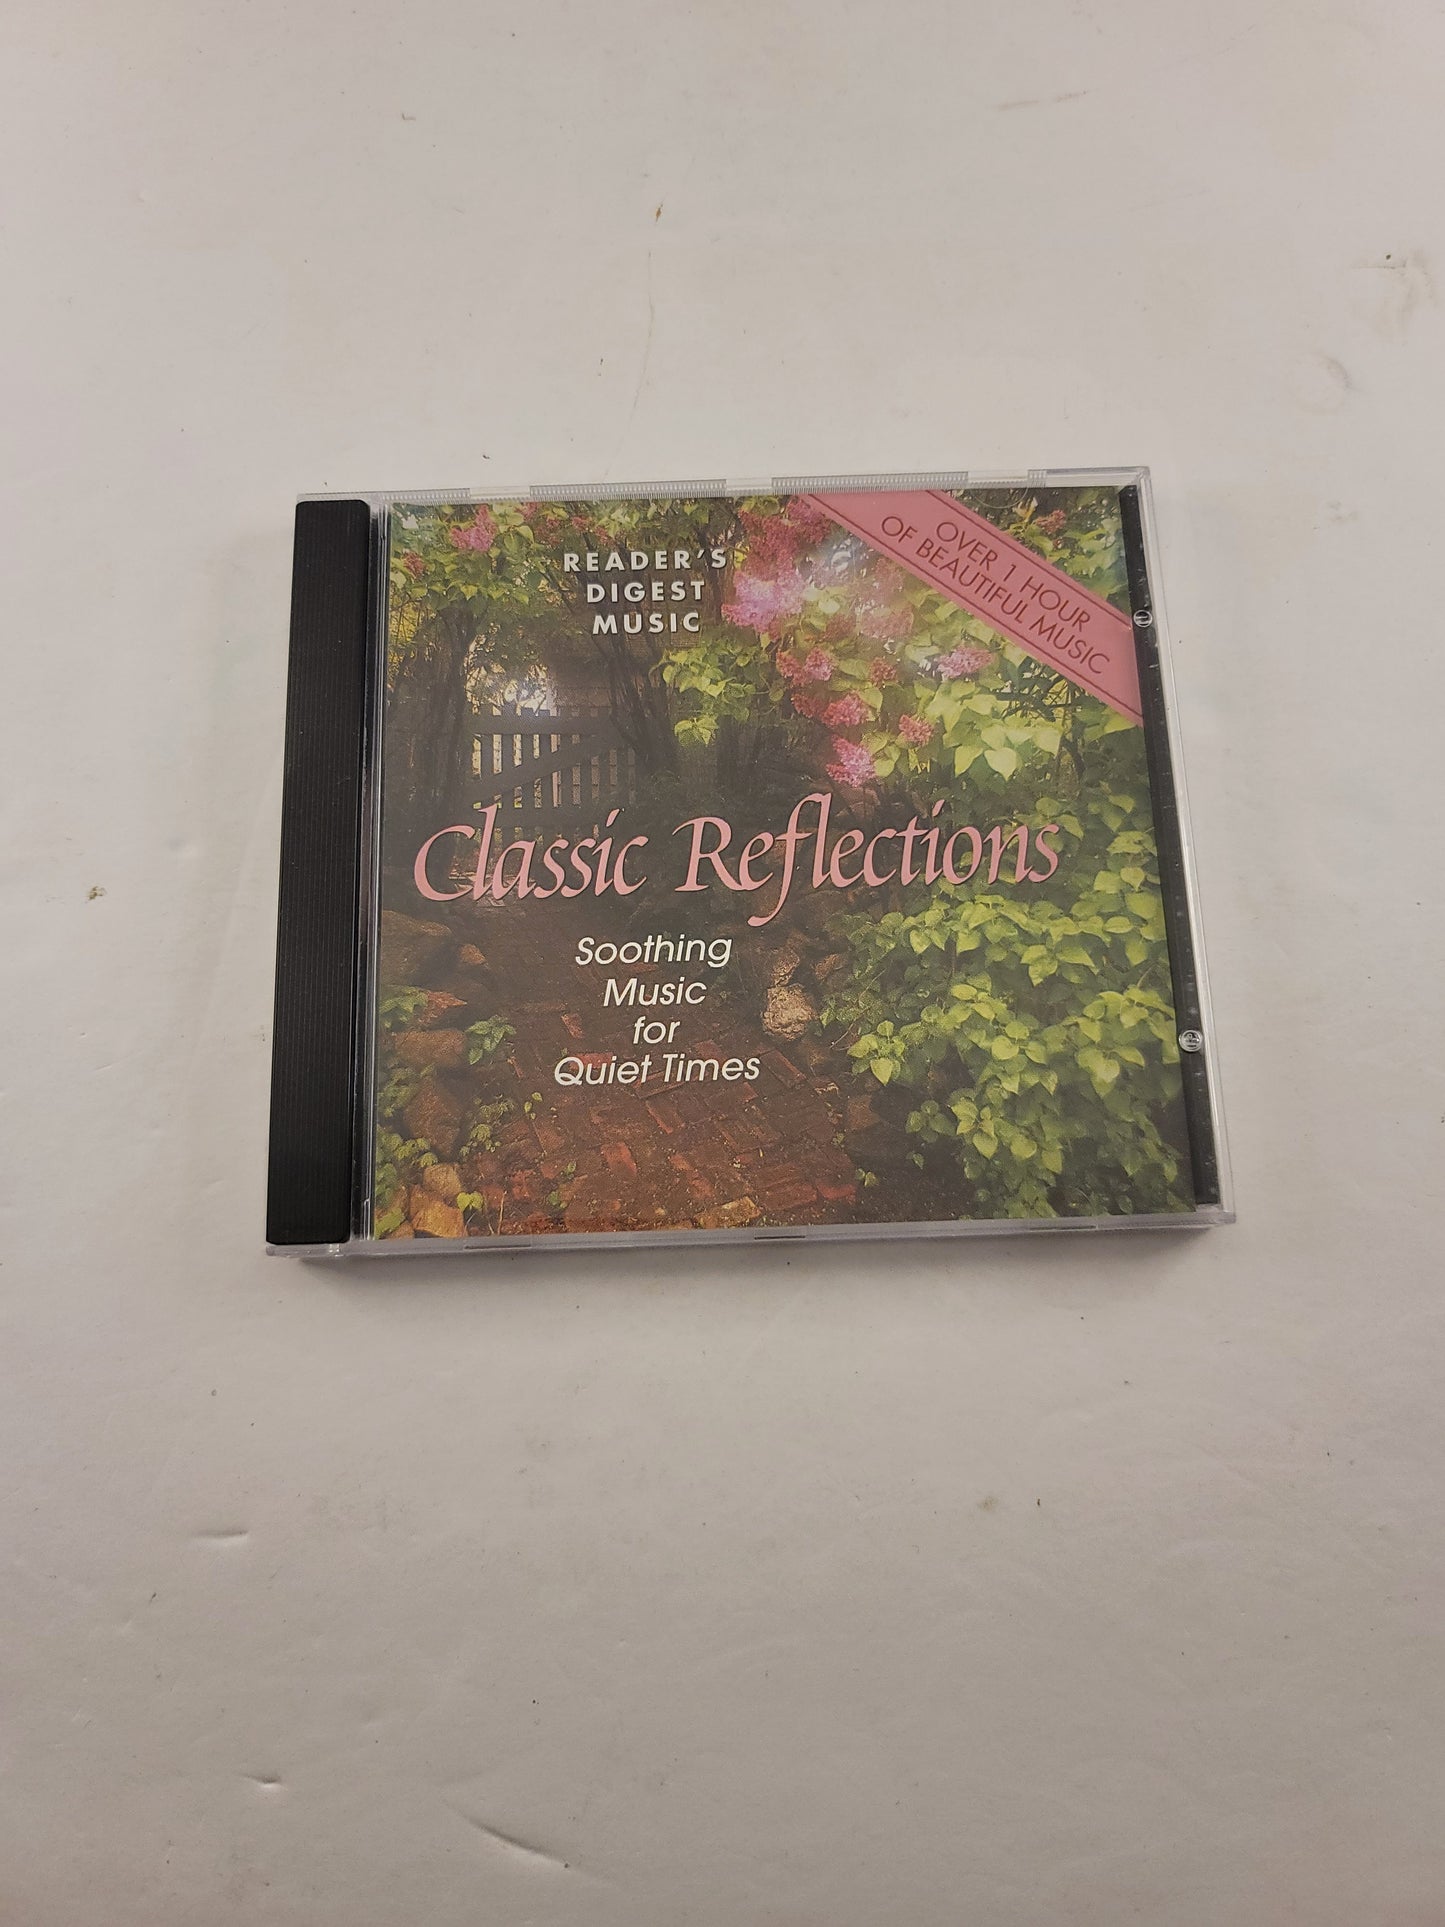 Classic Reflections - Reader's Digest Music - Soothing Music For Quiet Times